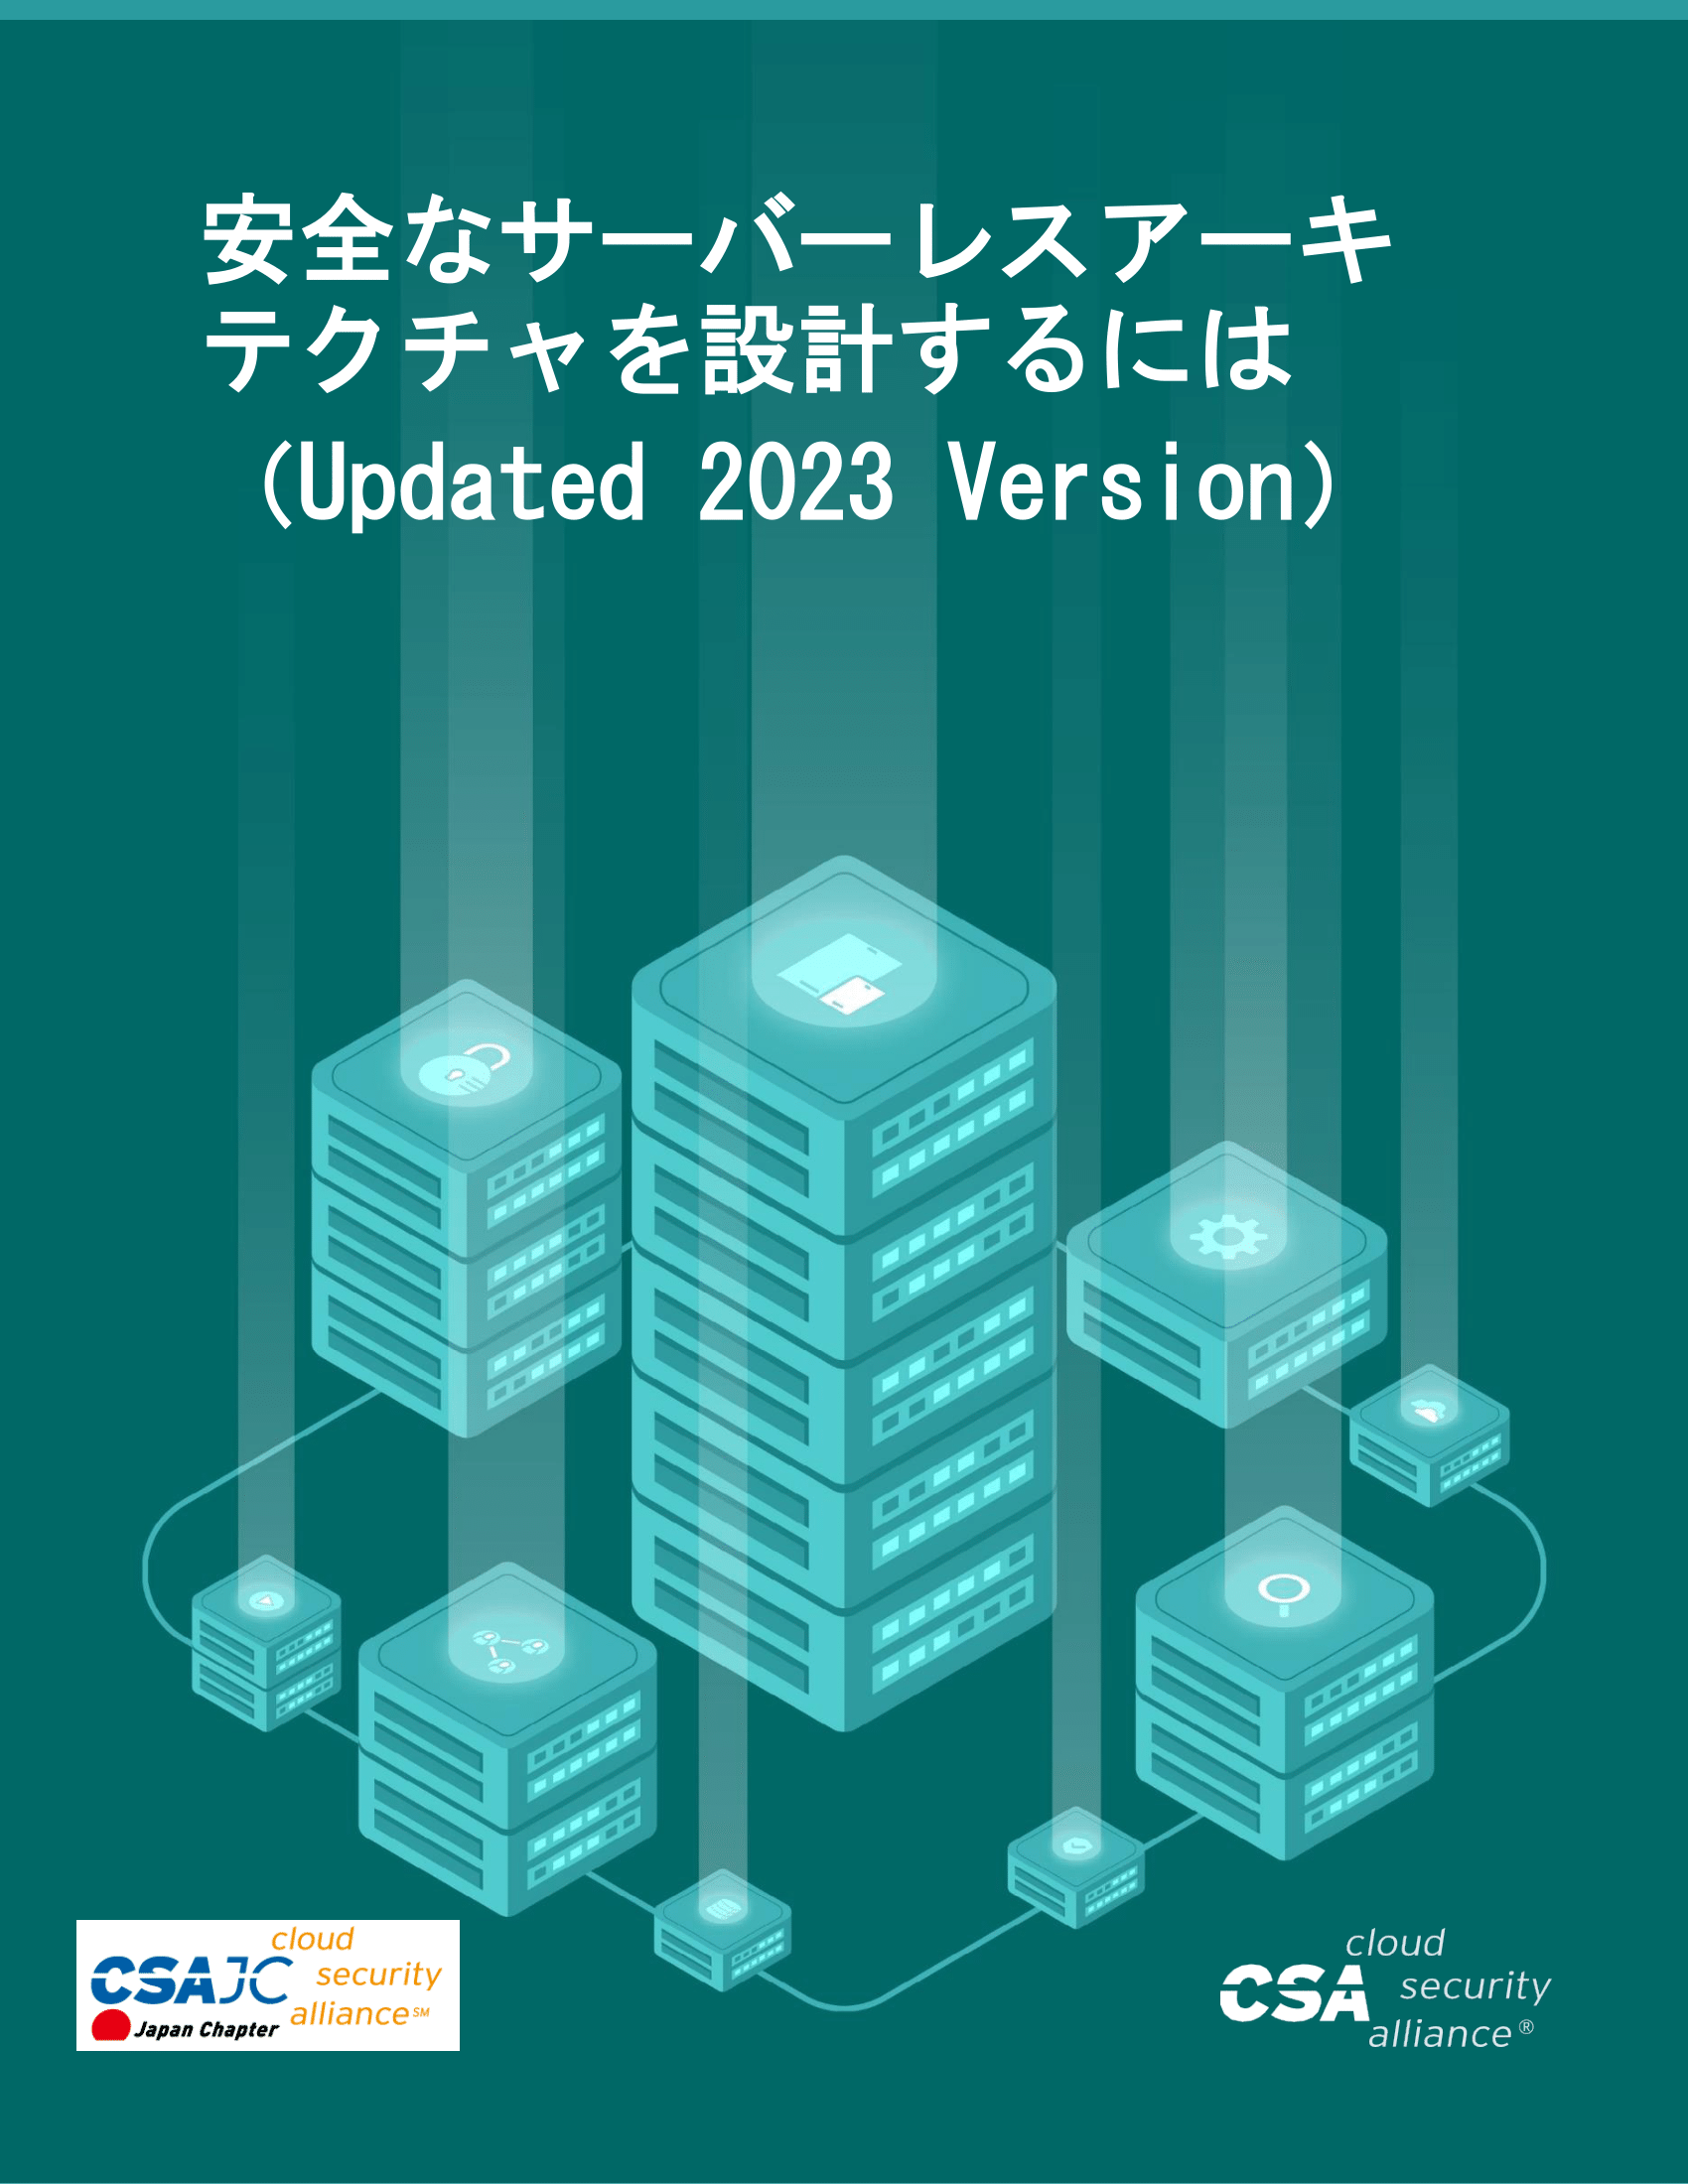 How to Design a Secure Serverless Architecture (2023 Version) - Japanese Translation